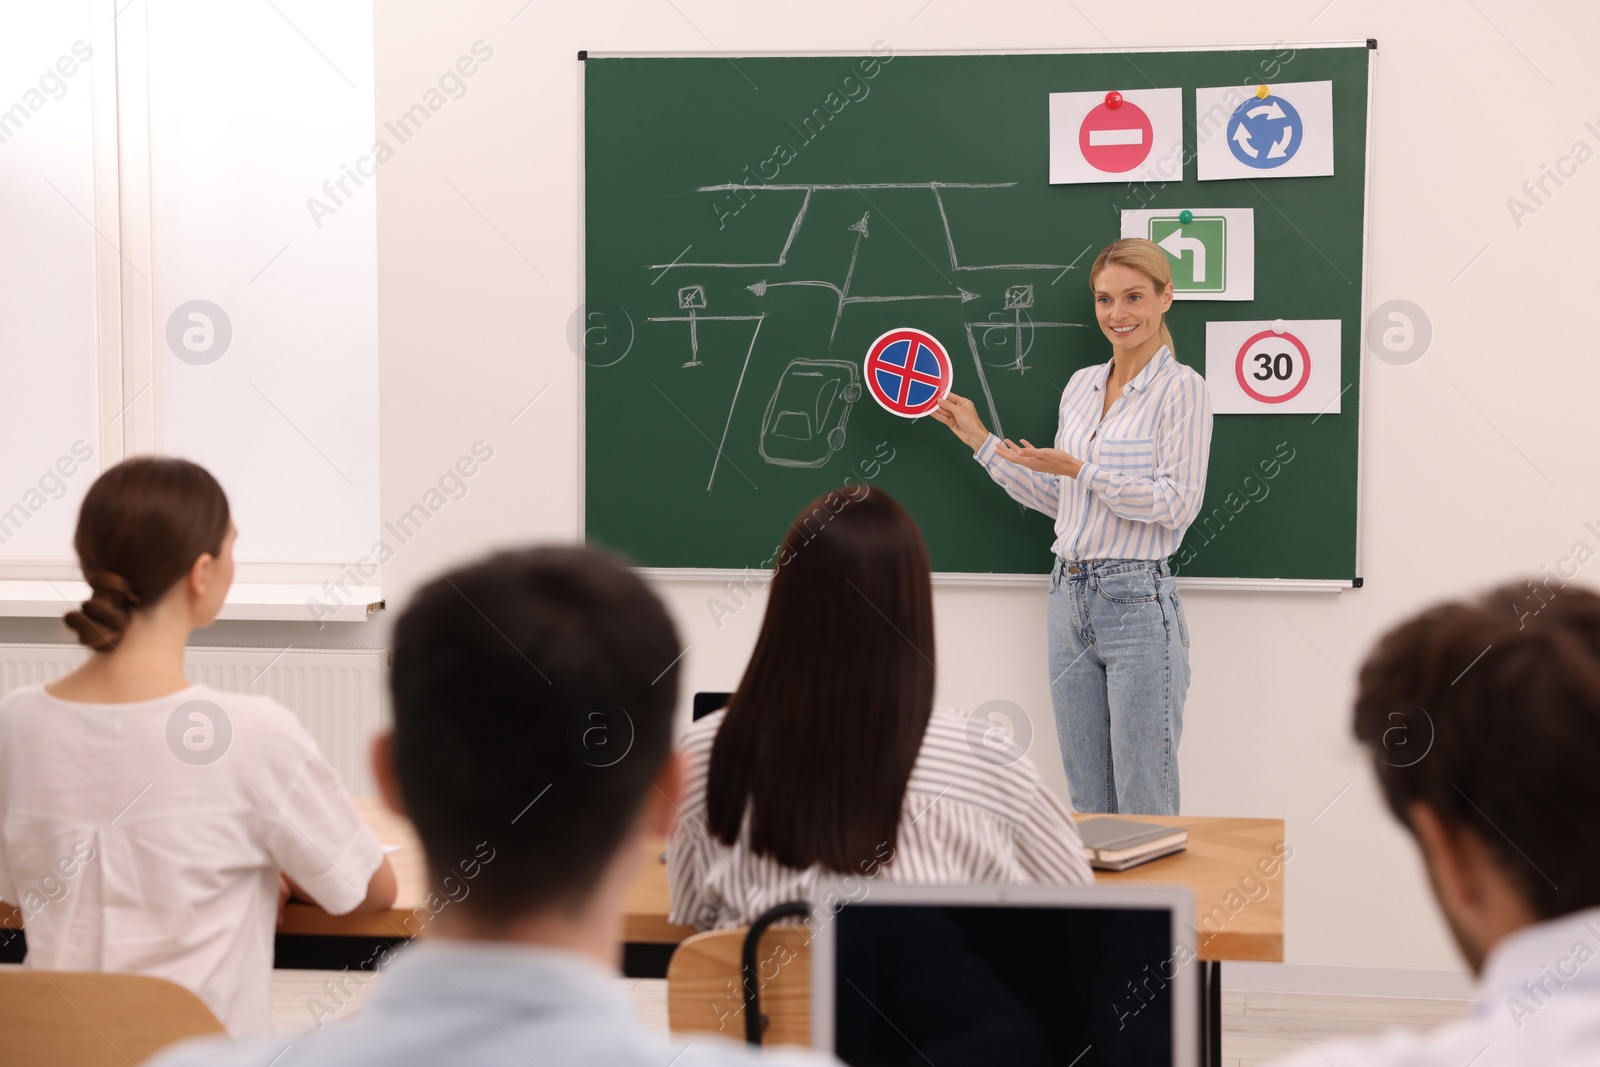 Photo of Teacher showing No Stopping road sign near chalkboard during lesson in driving school